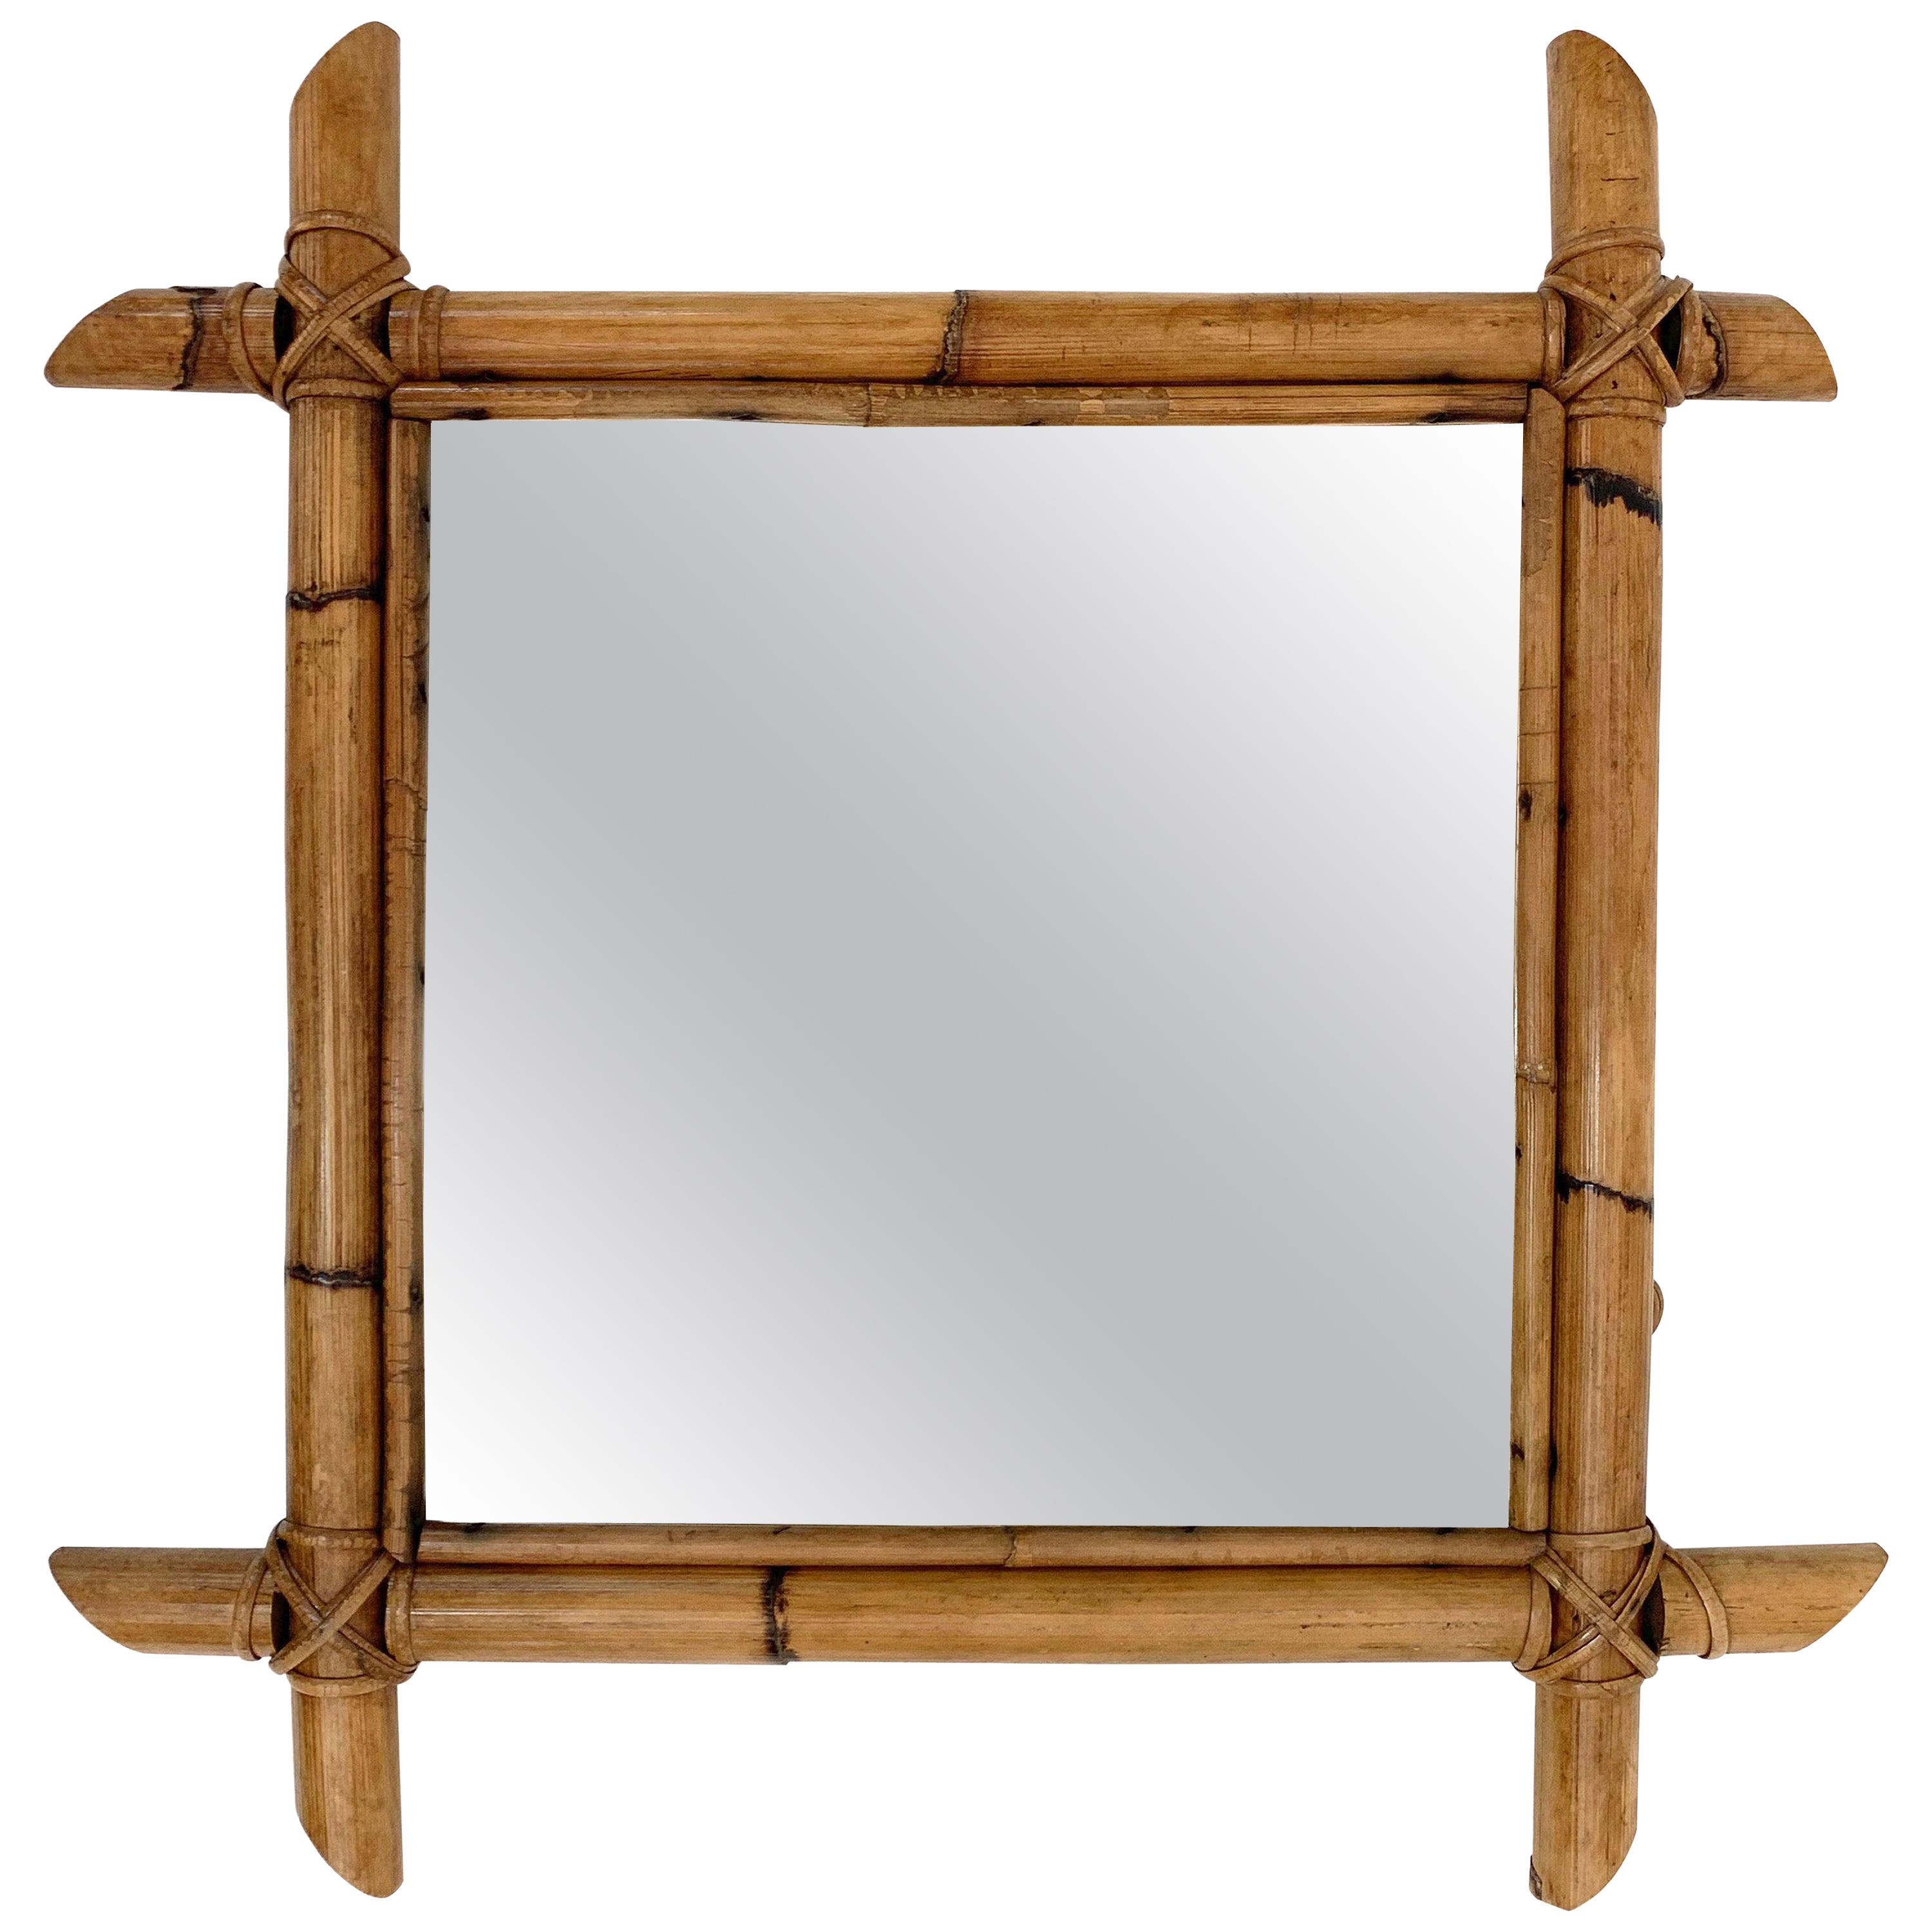 Midcentury Square Italian Mirror with Bamboo Woven Wicker Frame, 1970s